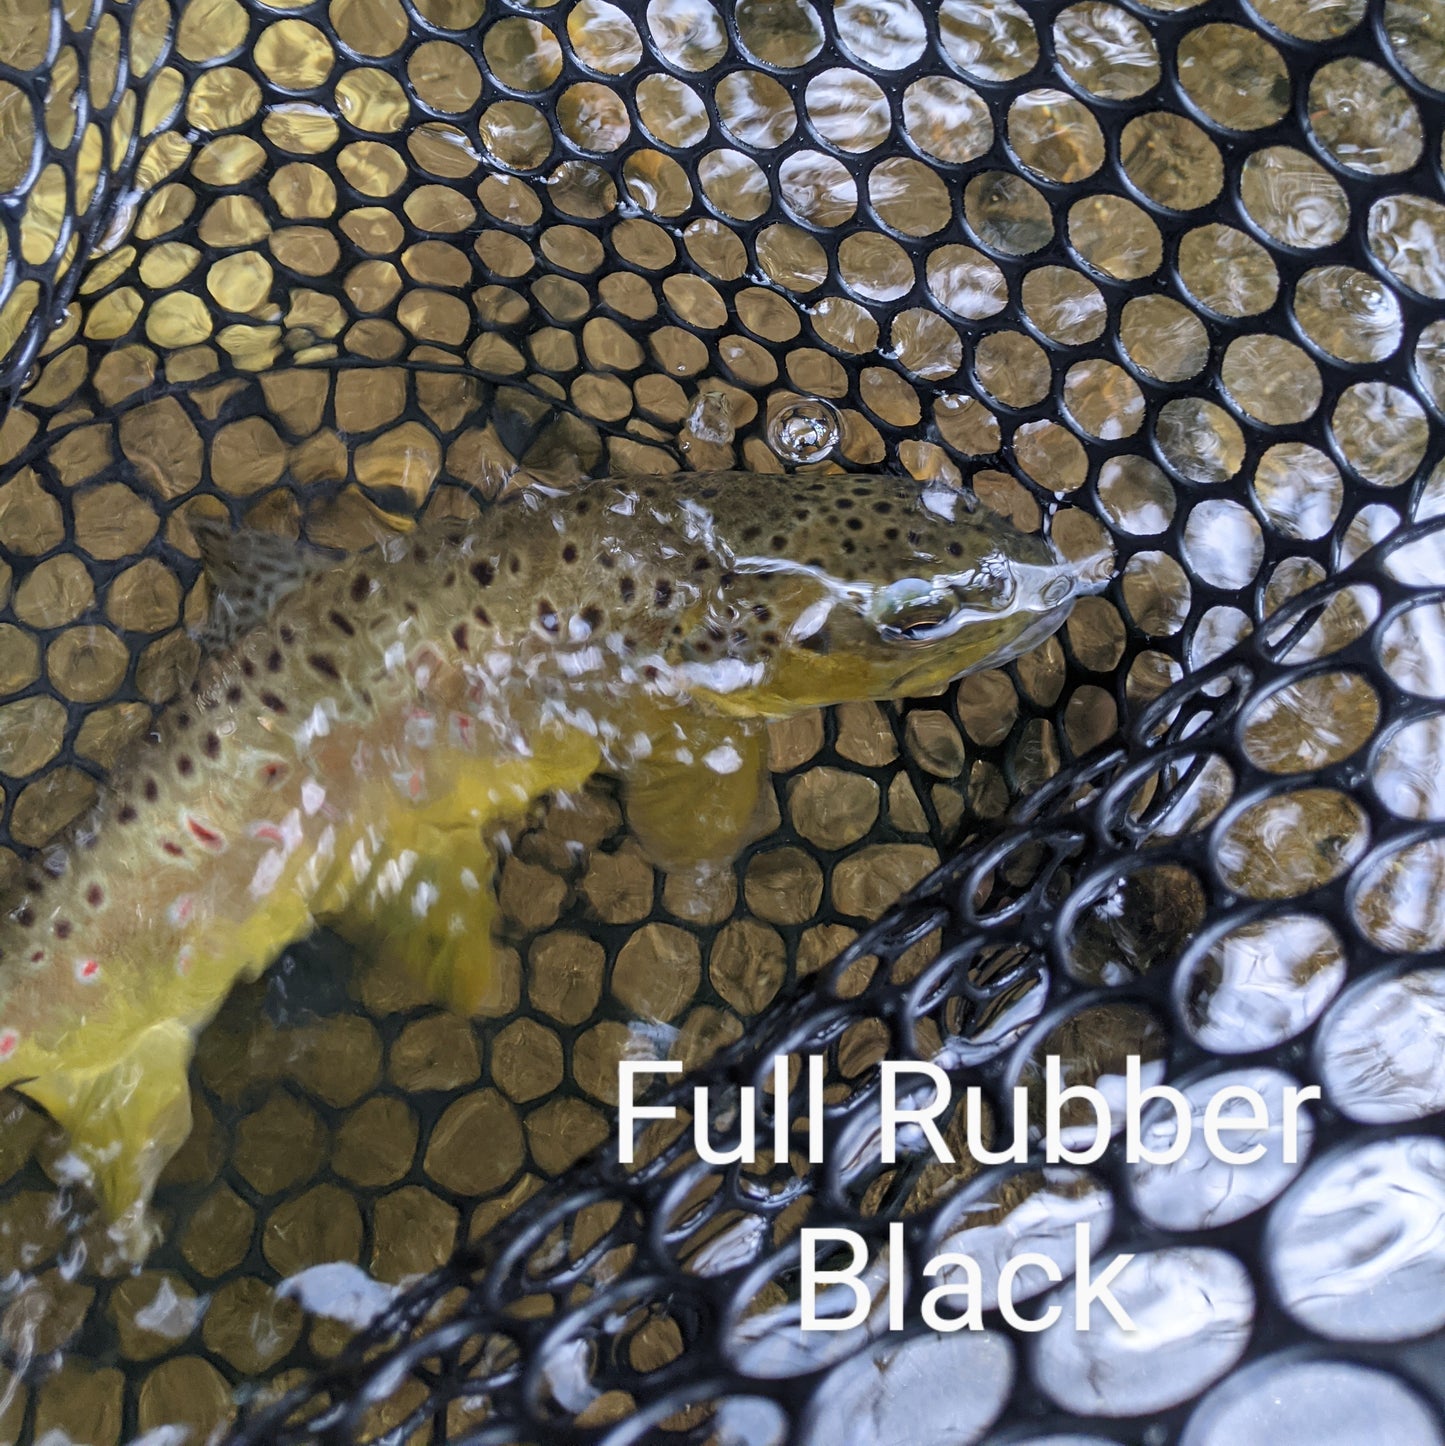 Upstream Bamboo + Copper Hand Crafted Fly Fishing Net